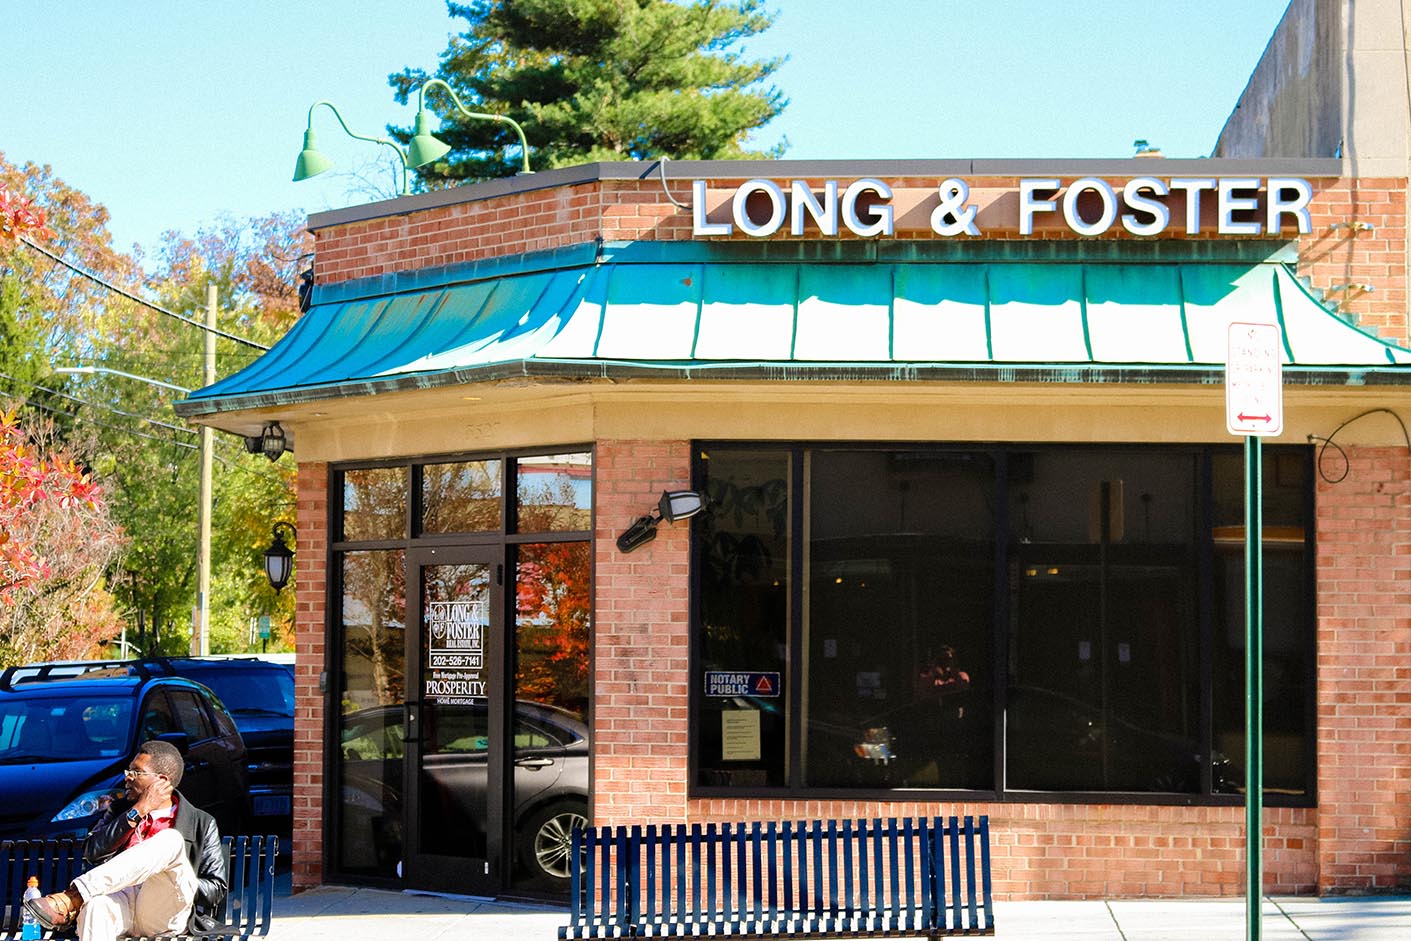 Long & Foster Real Estate office in Brookland, Washington, DC